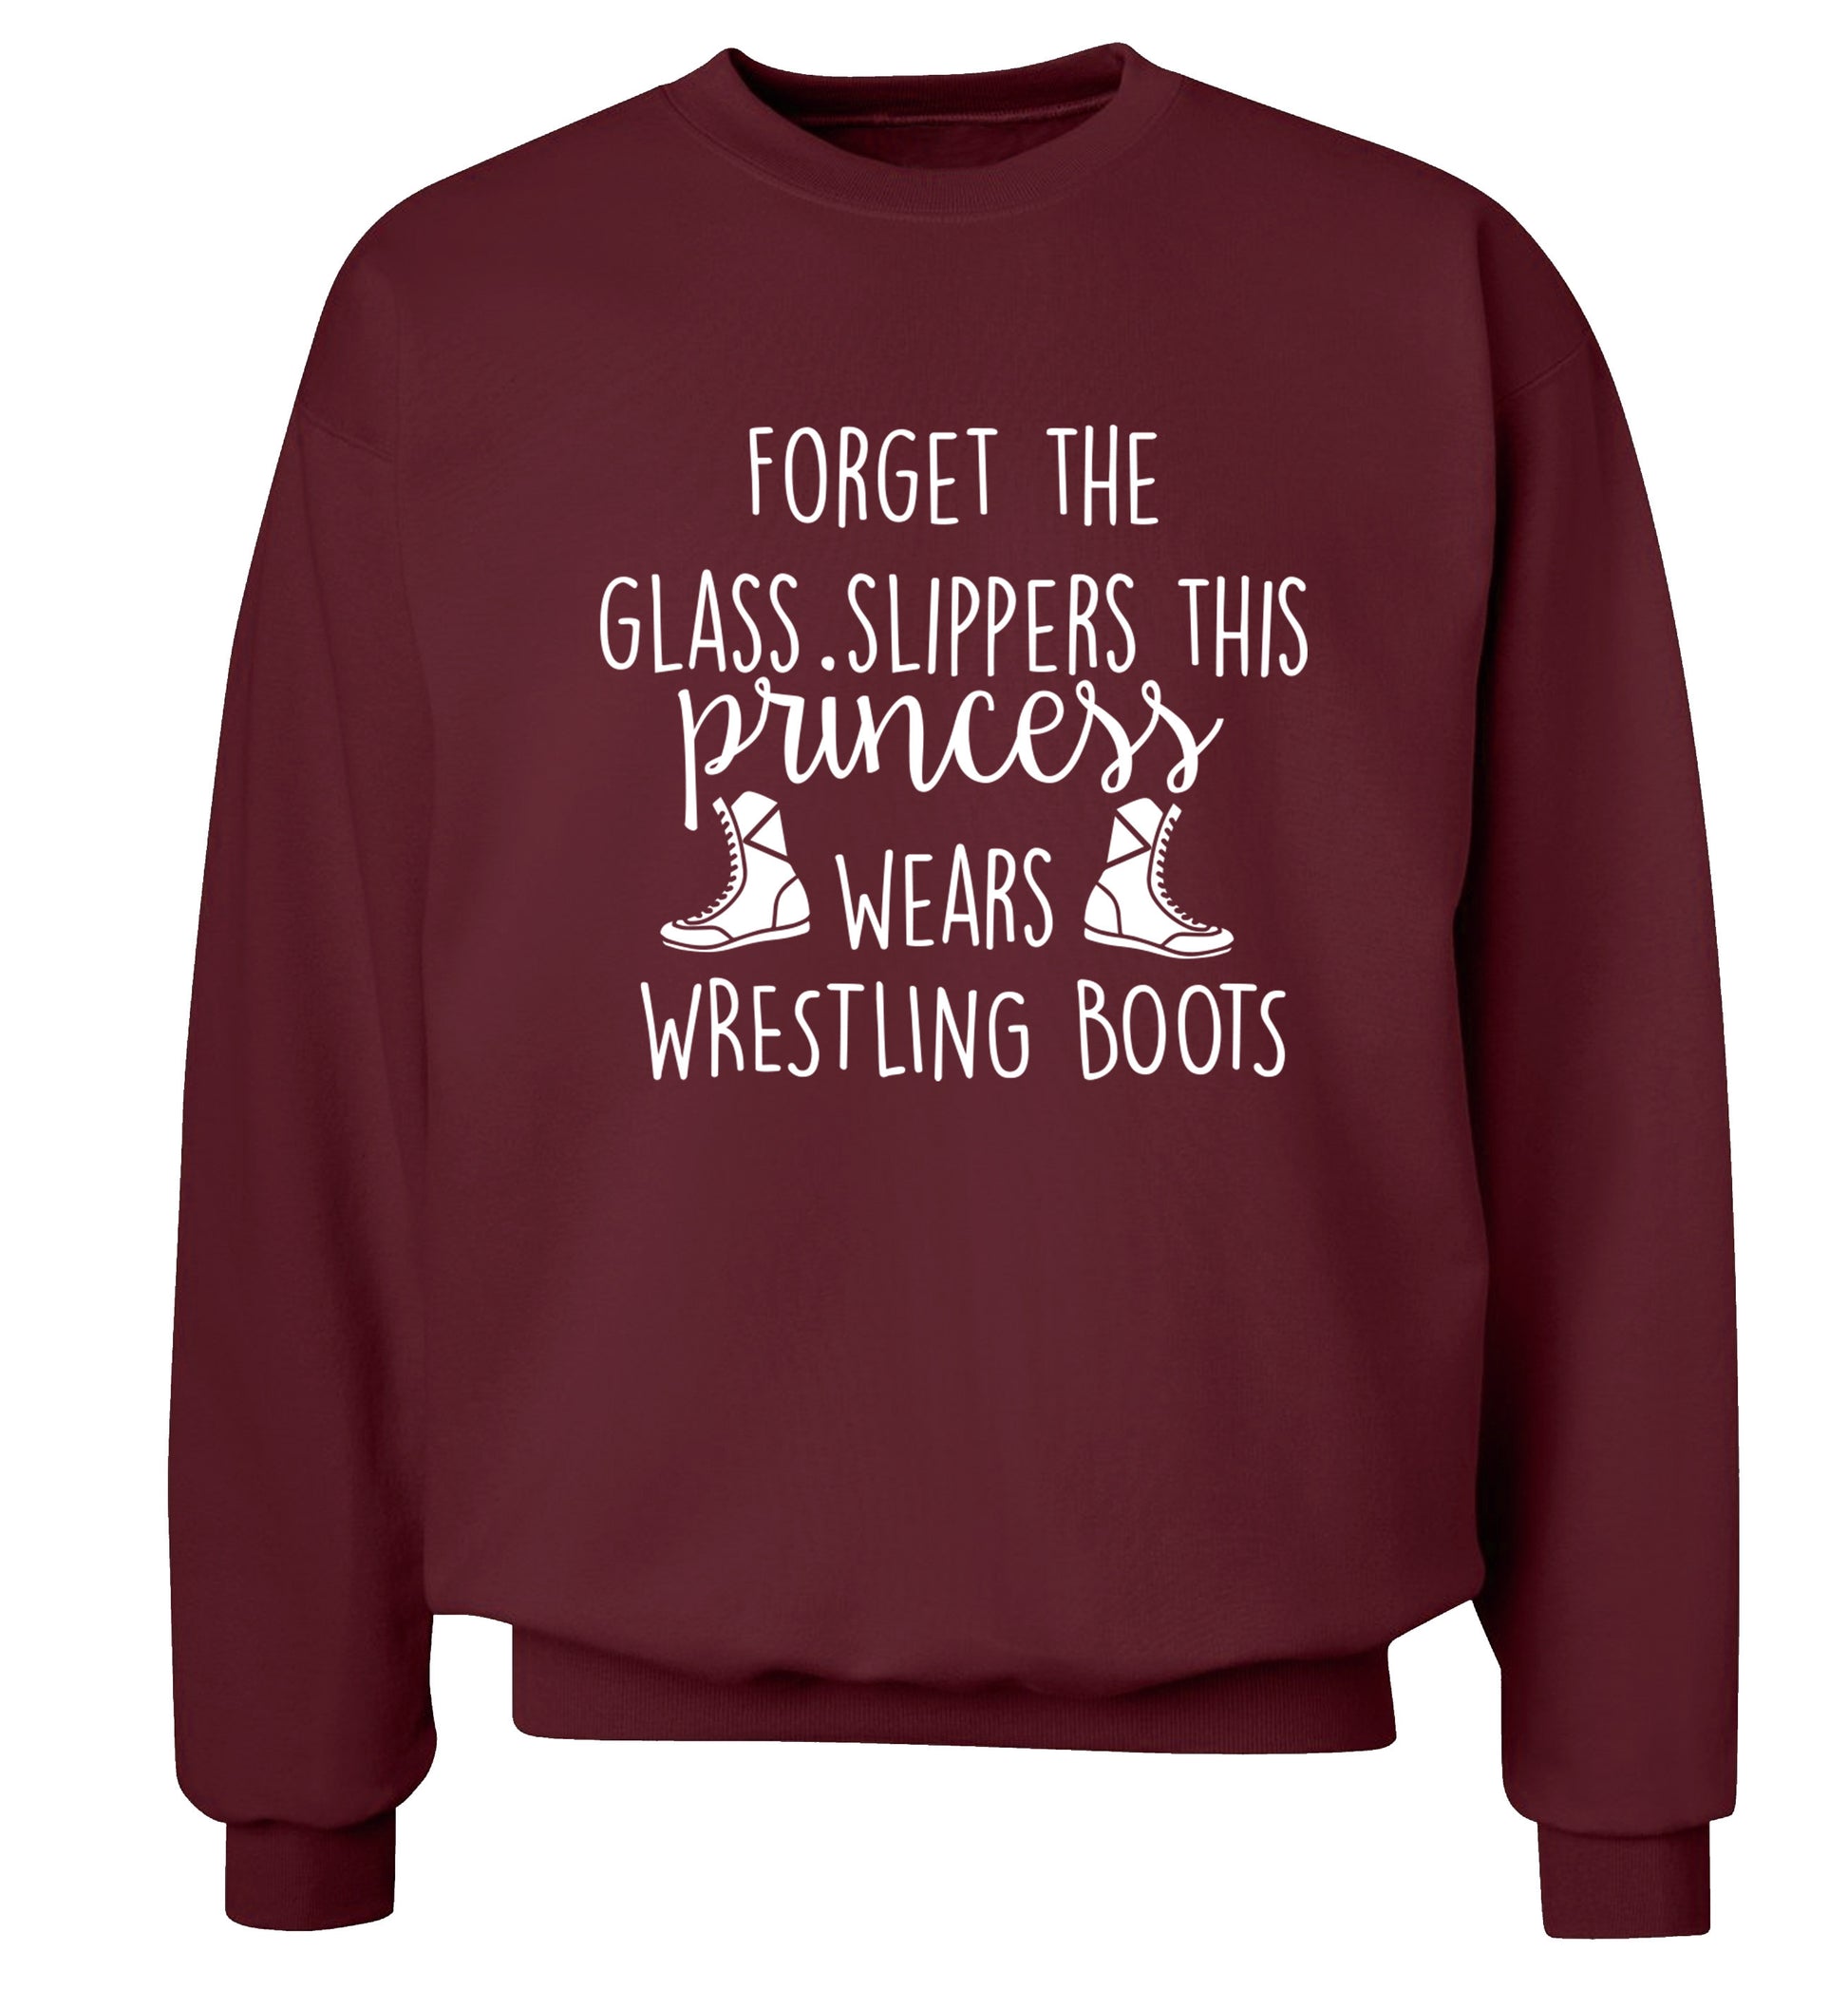 Forget the glass slippers this princess wears wrestling boots Adult's unisex maroon Sweater 2XL